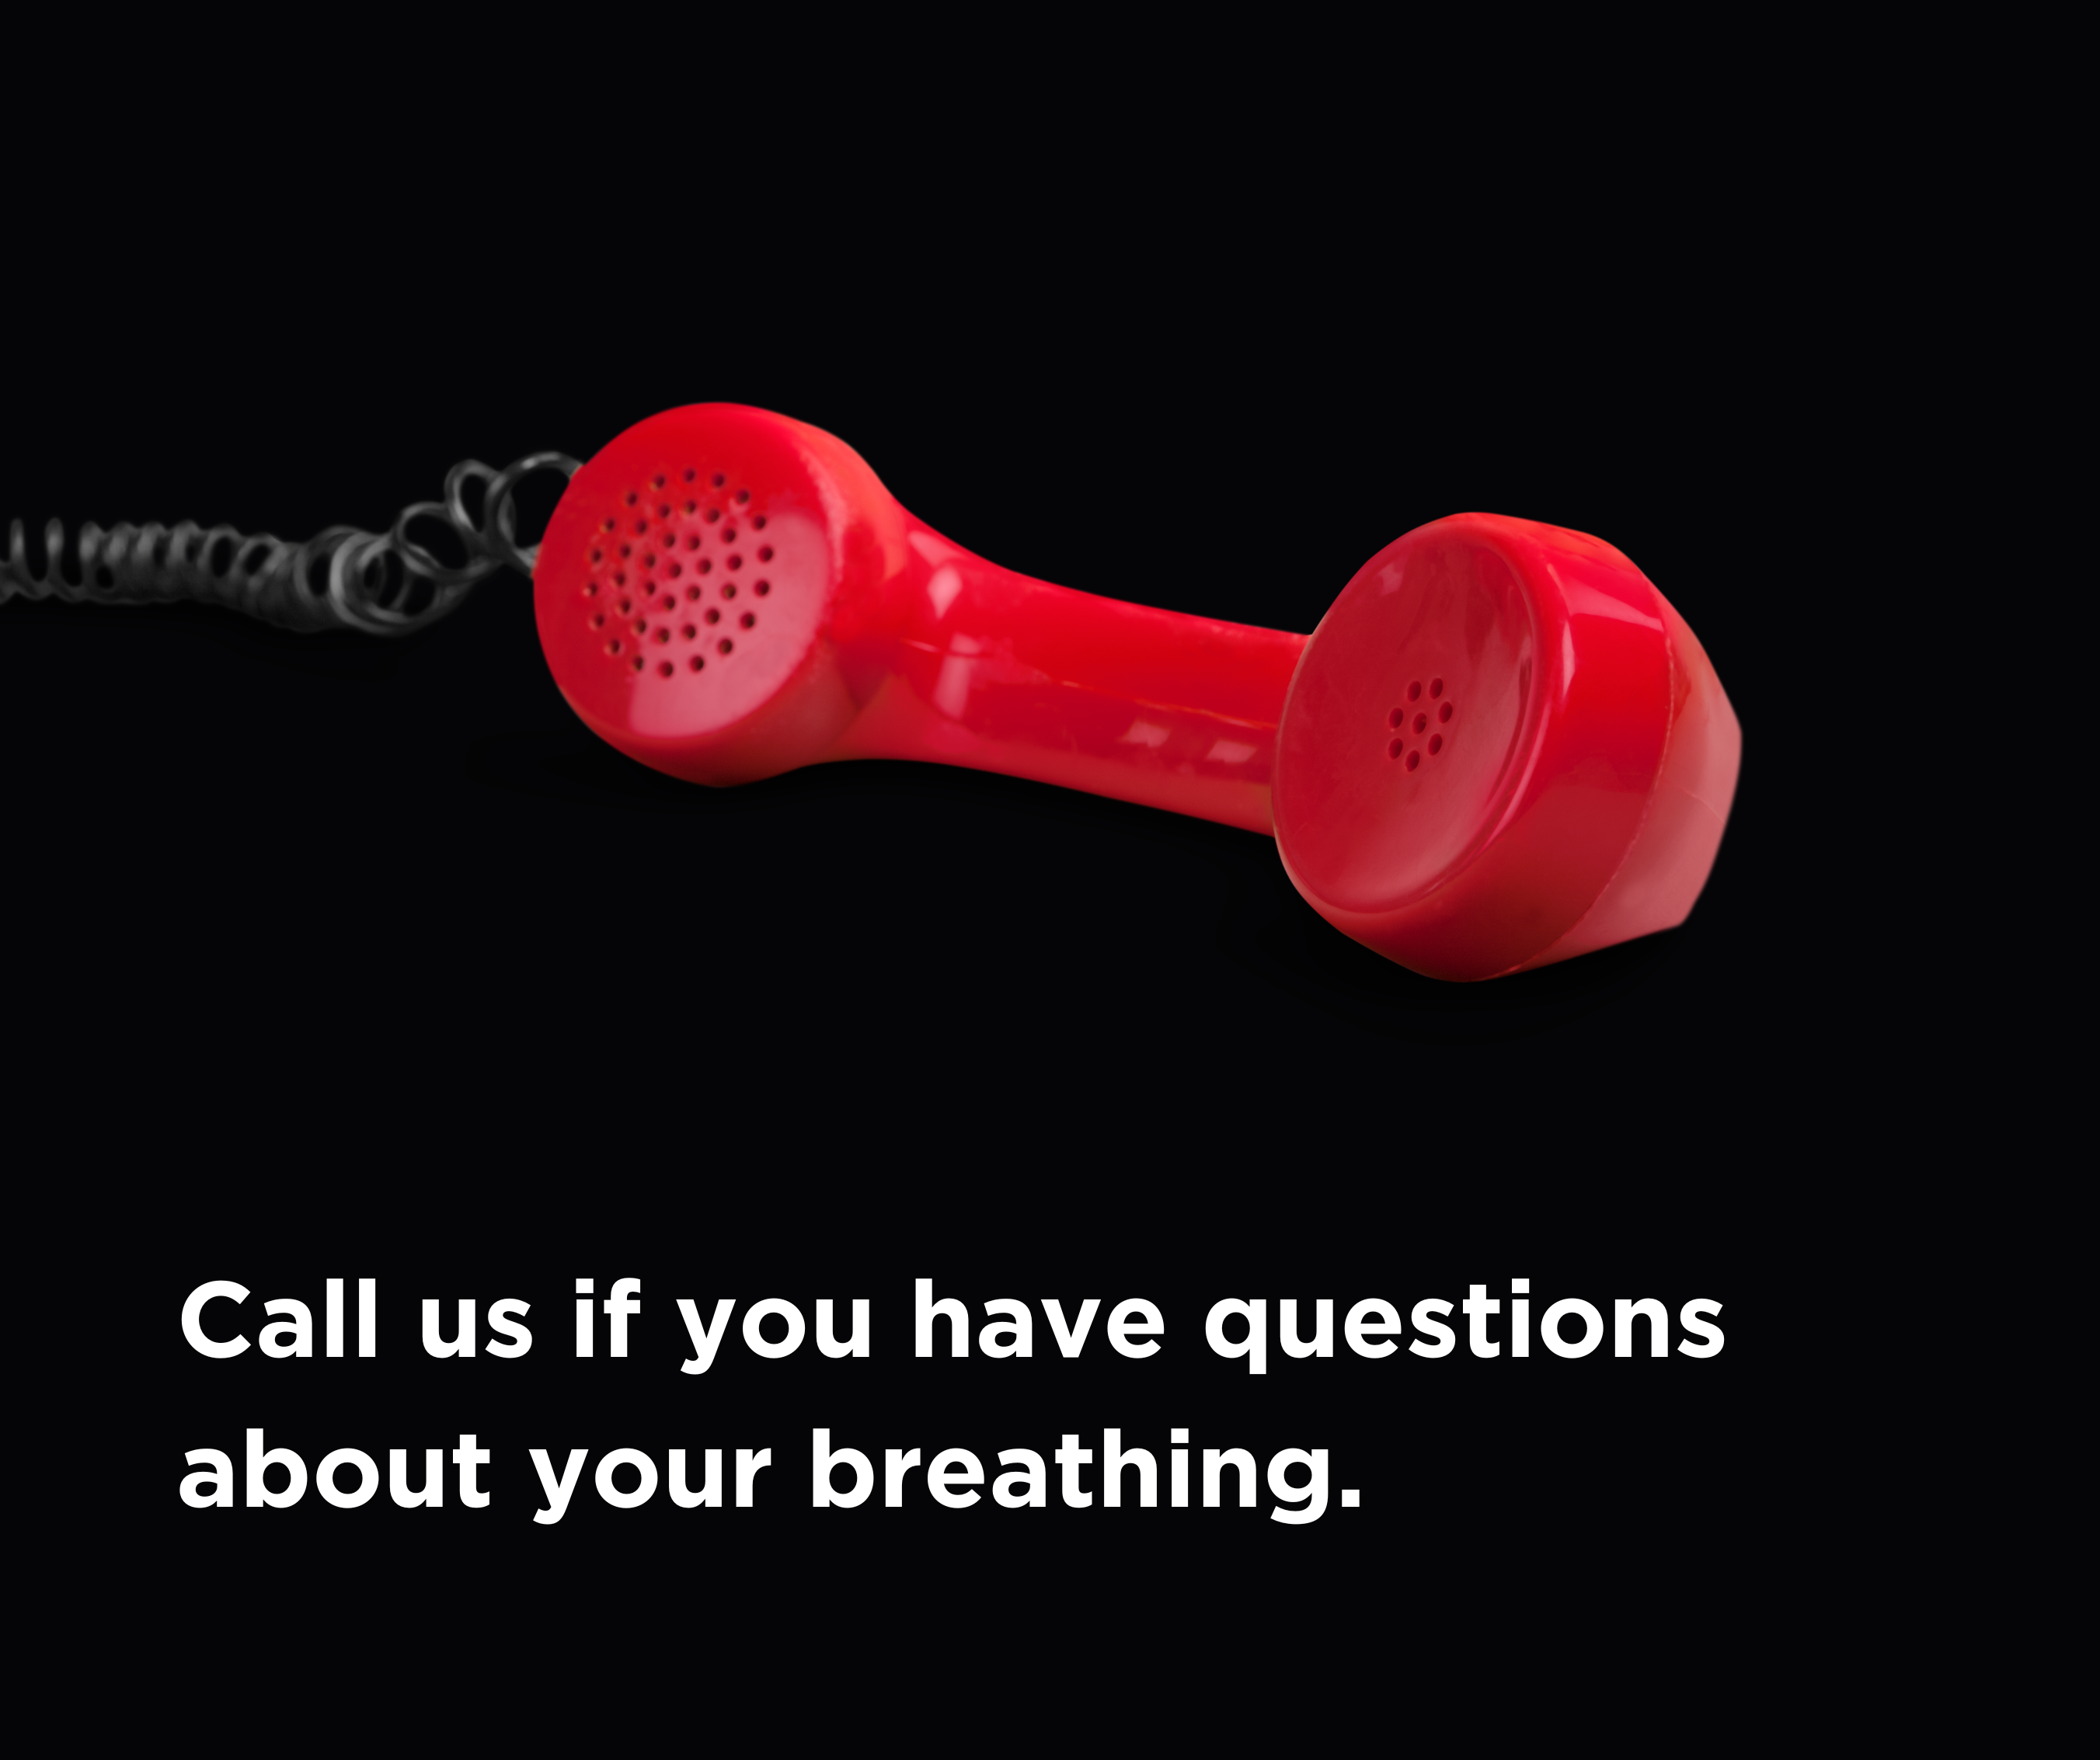 Closeup of red phone receiver with caption "Call us if you have questions about your breathing"